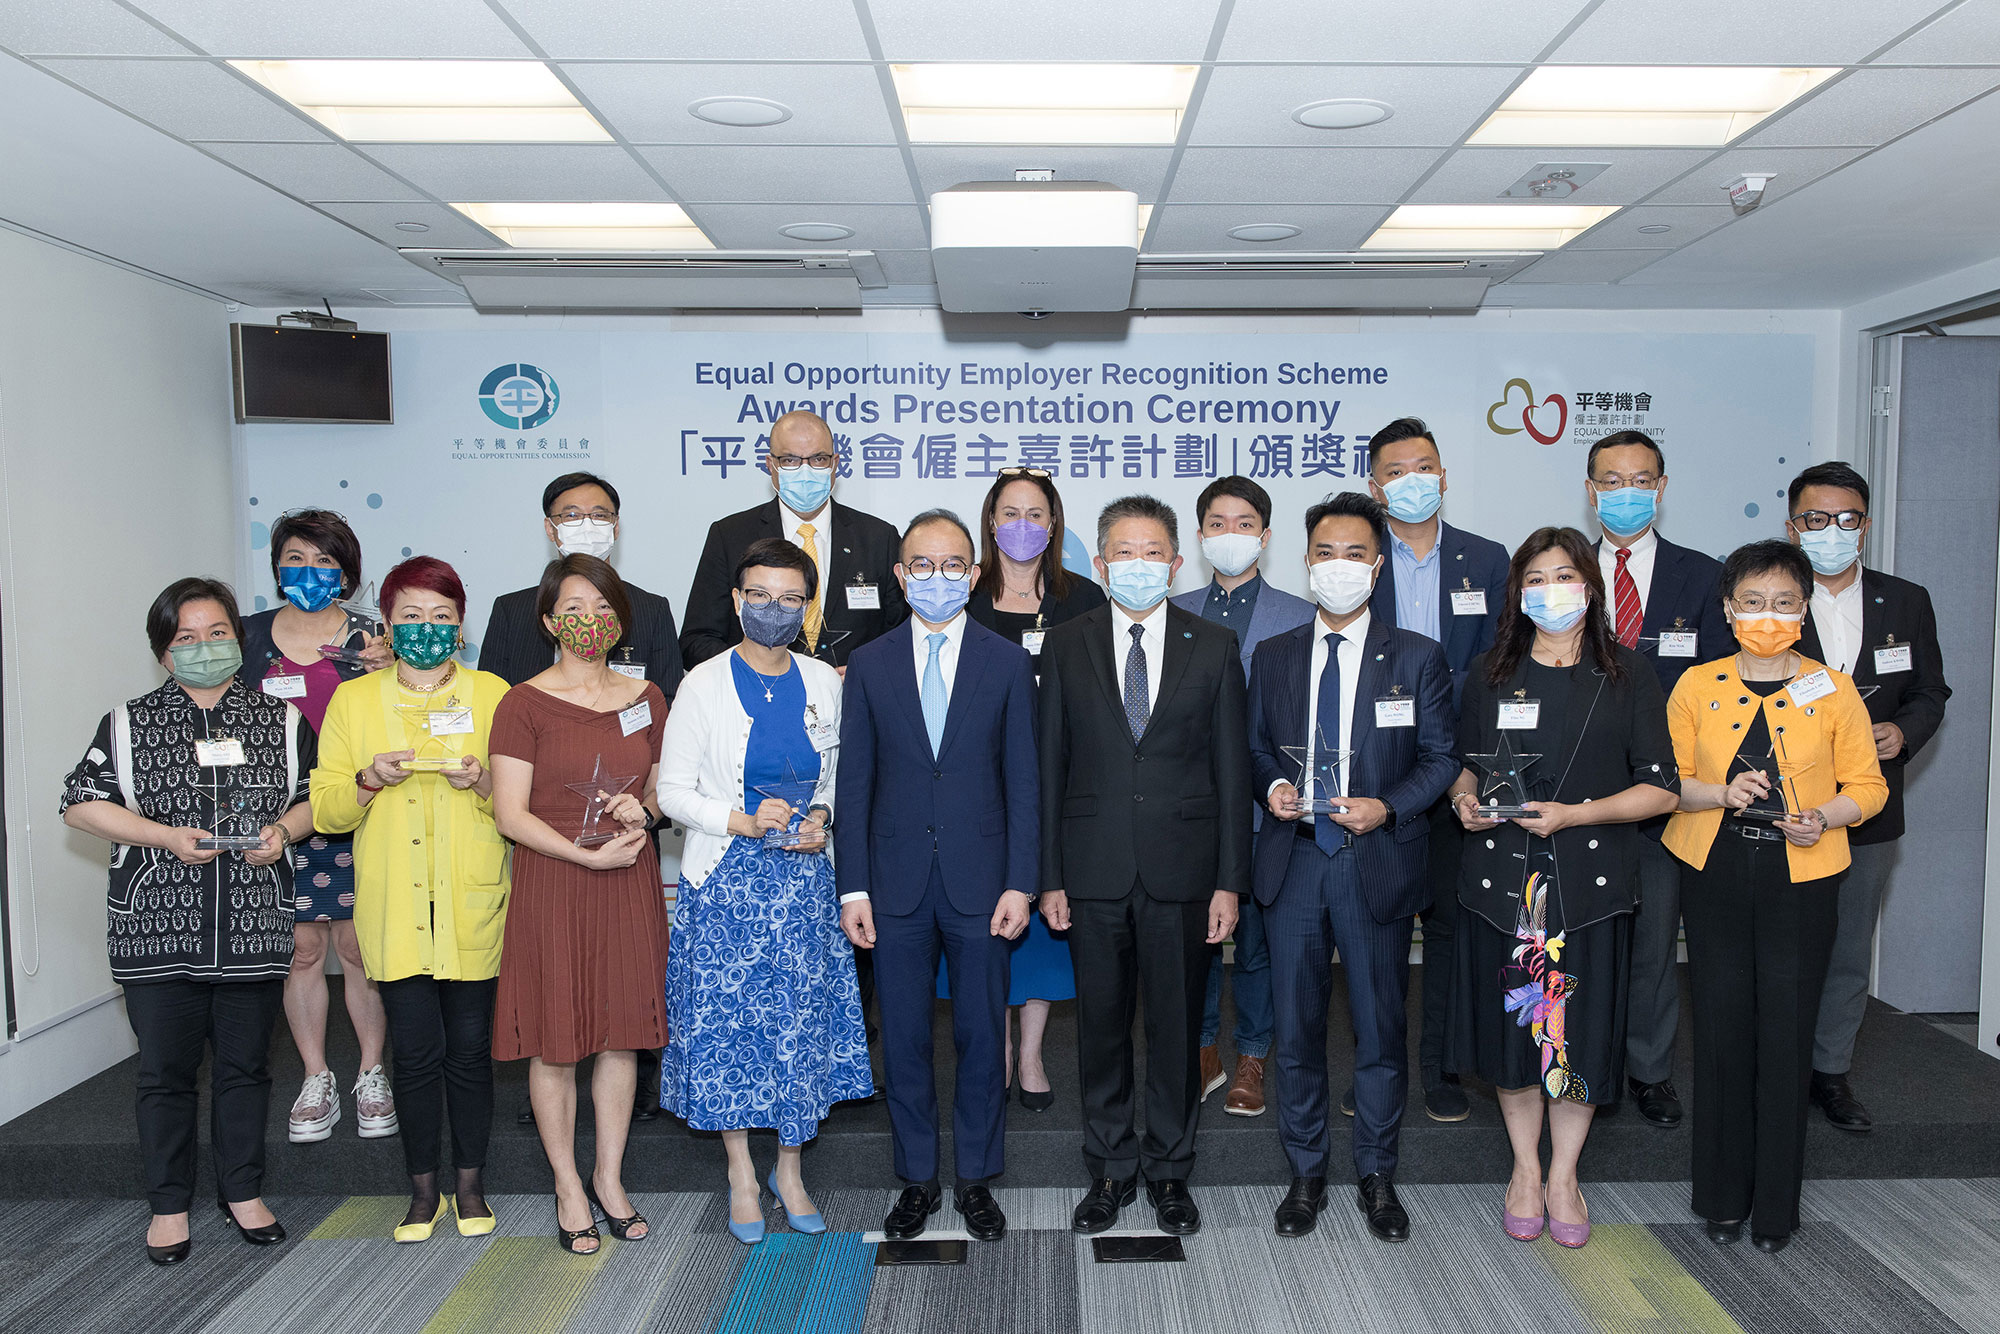 Mr Erick TSANG Kwok-wai, IDSM, JP, Secretary for Constitutional and Mainland Affairs (front row, centre) and Mr Ricky CHU Man-kin, IDS, Chairperson of the EOC (front row, fourth right) join in a group photo with members of the assessment panels of the Equal Opportunity Employer Recognition Scheme.